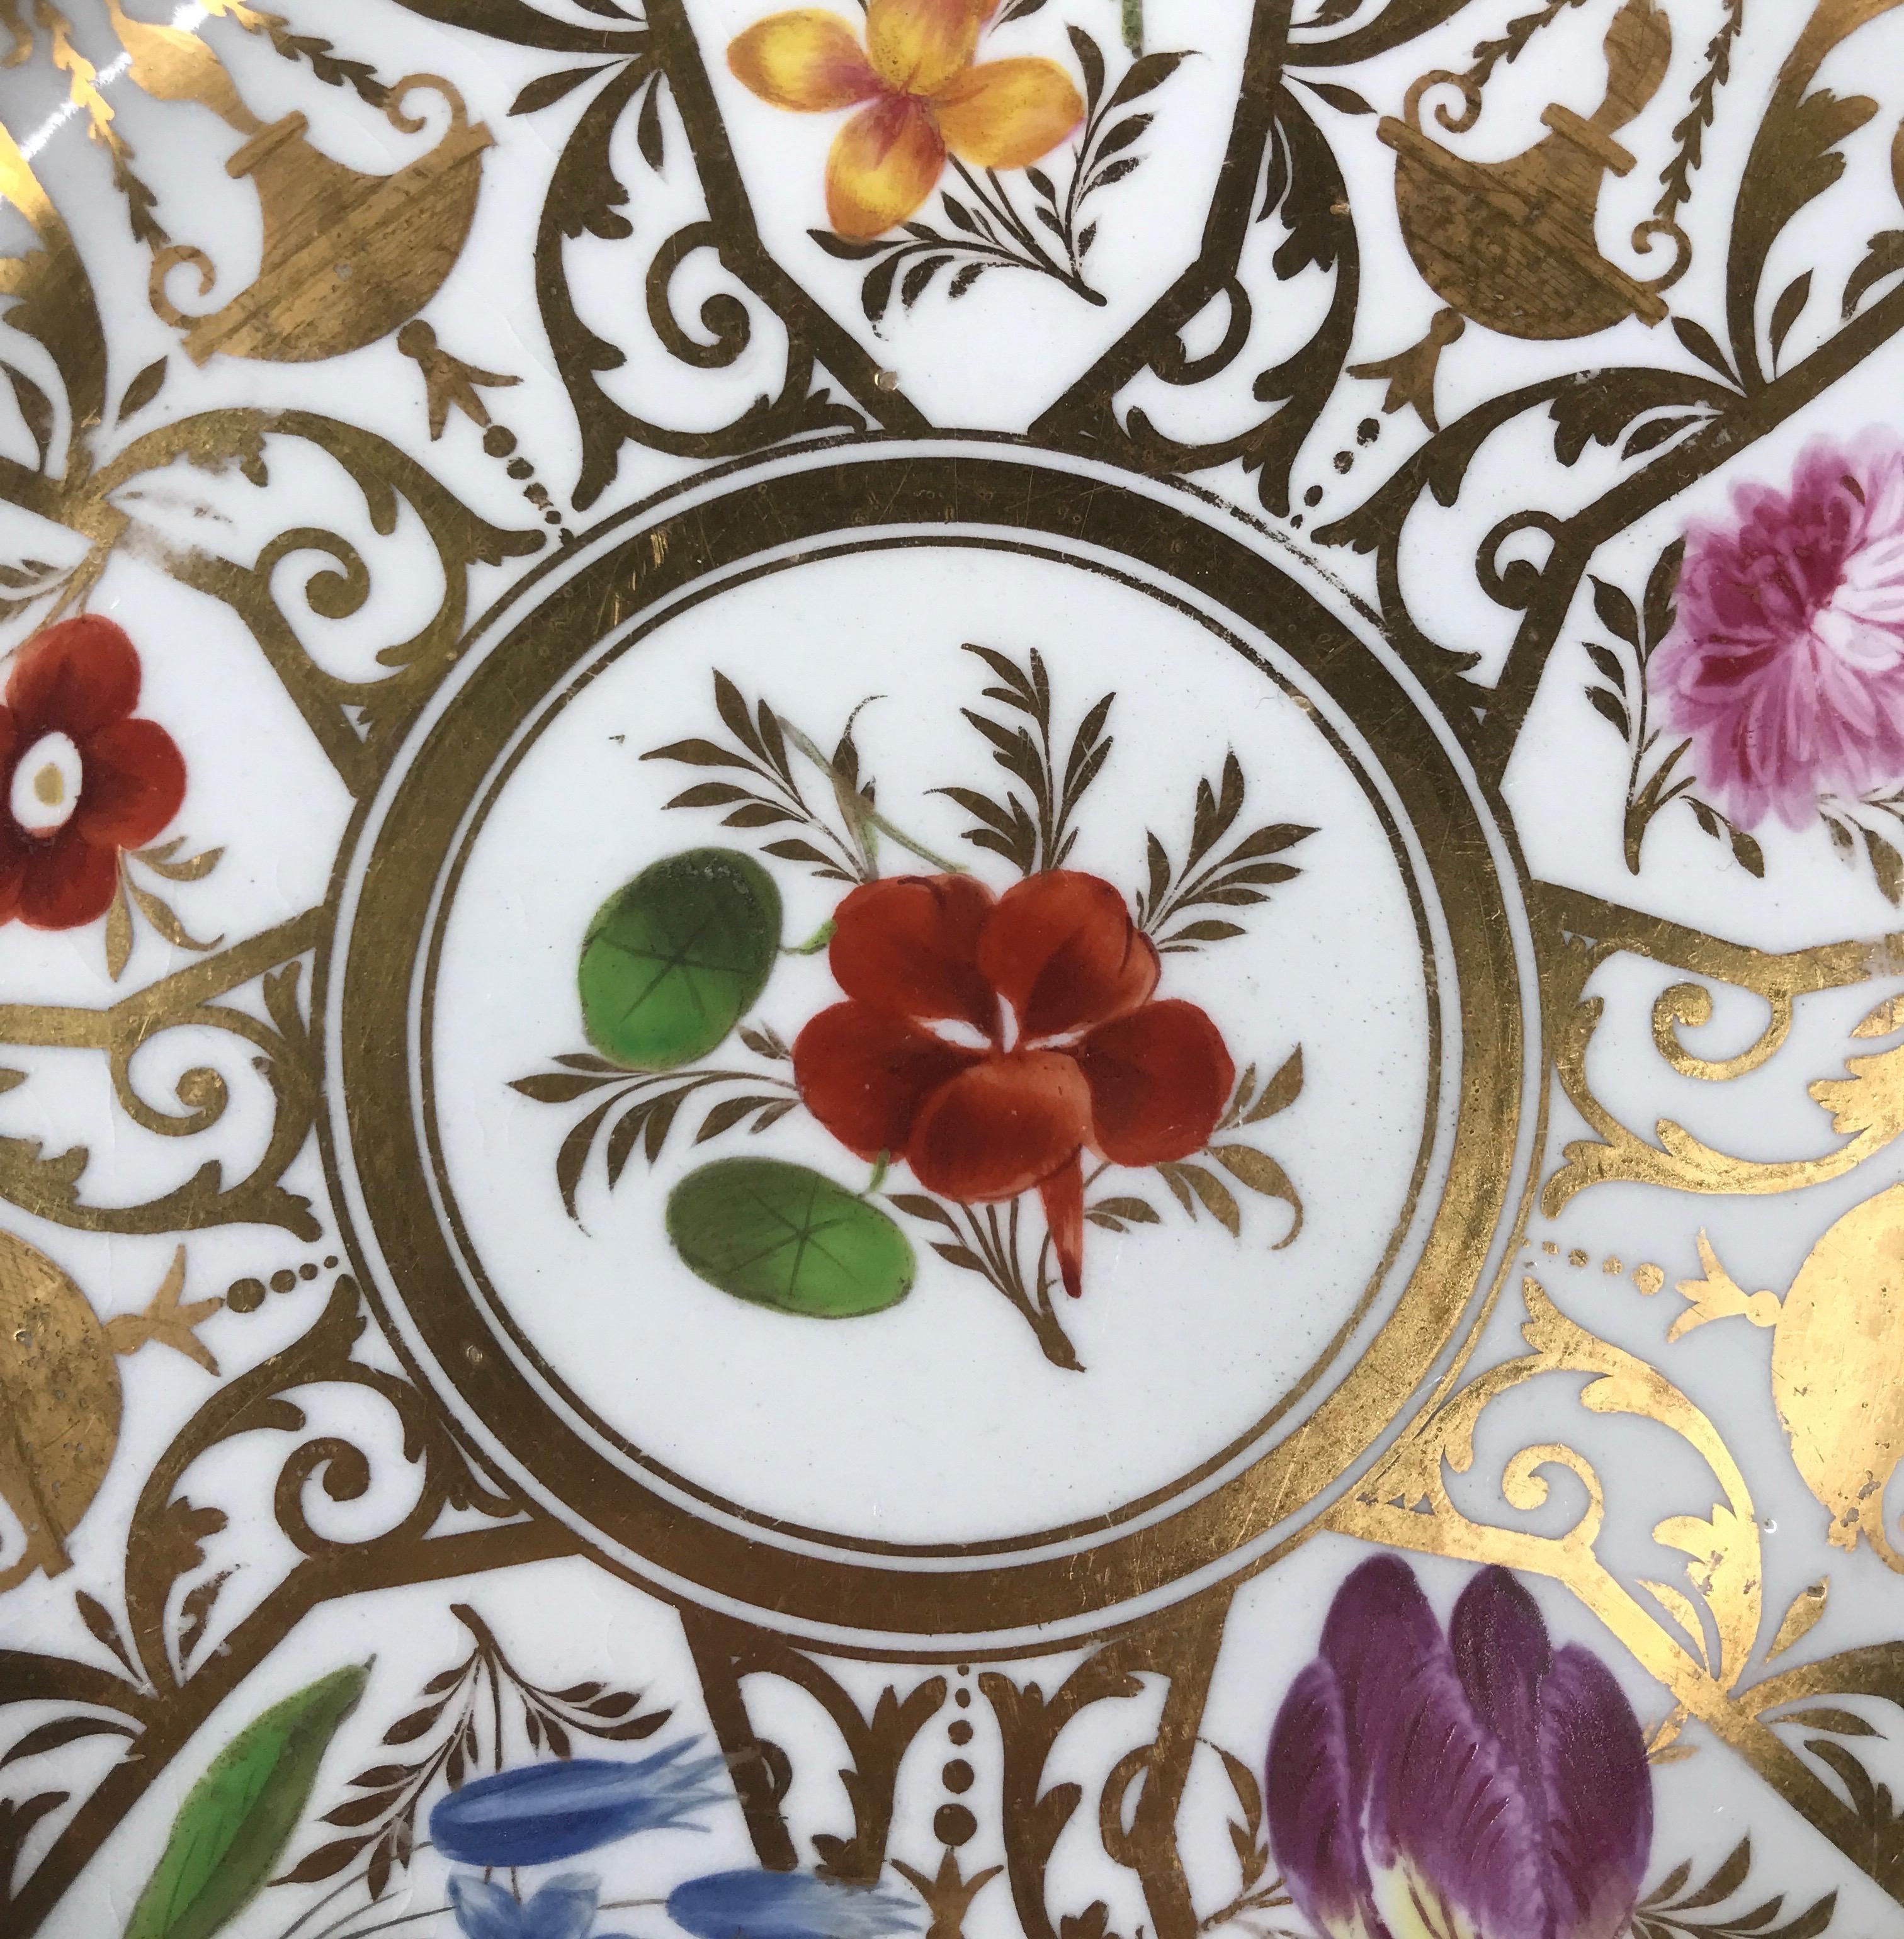 Neoclassical Coalport Plate, Baxter Decorated with Flowers & Geometric Gilding, c. 1805